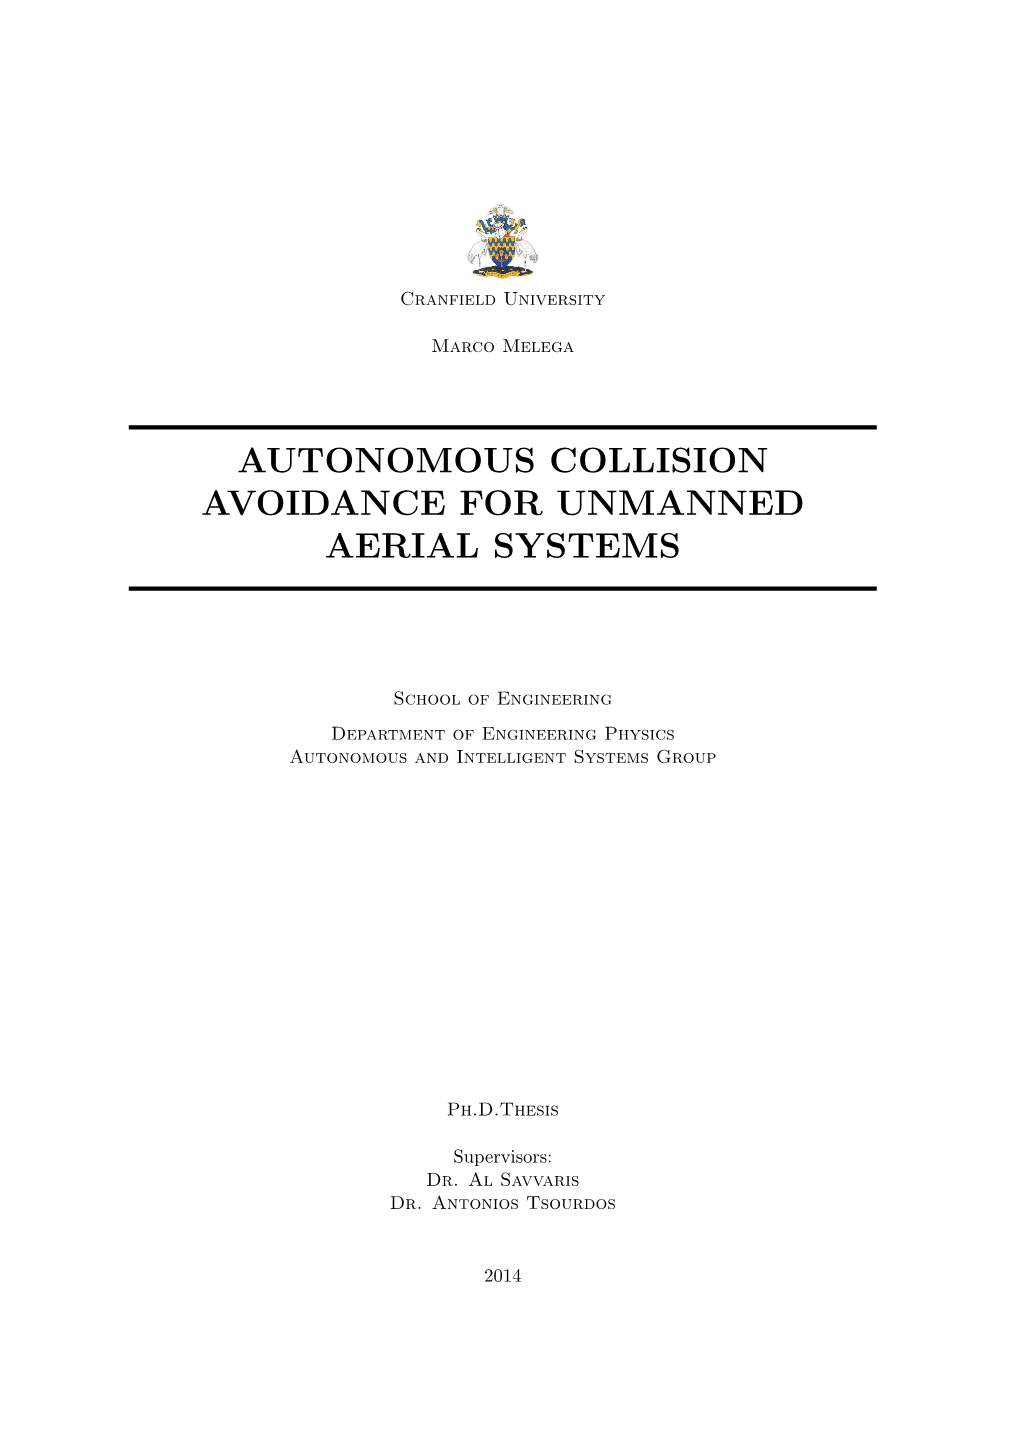 Autonomous Collision Avoidance for Unmanned Aerial Systems